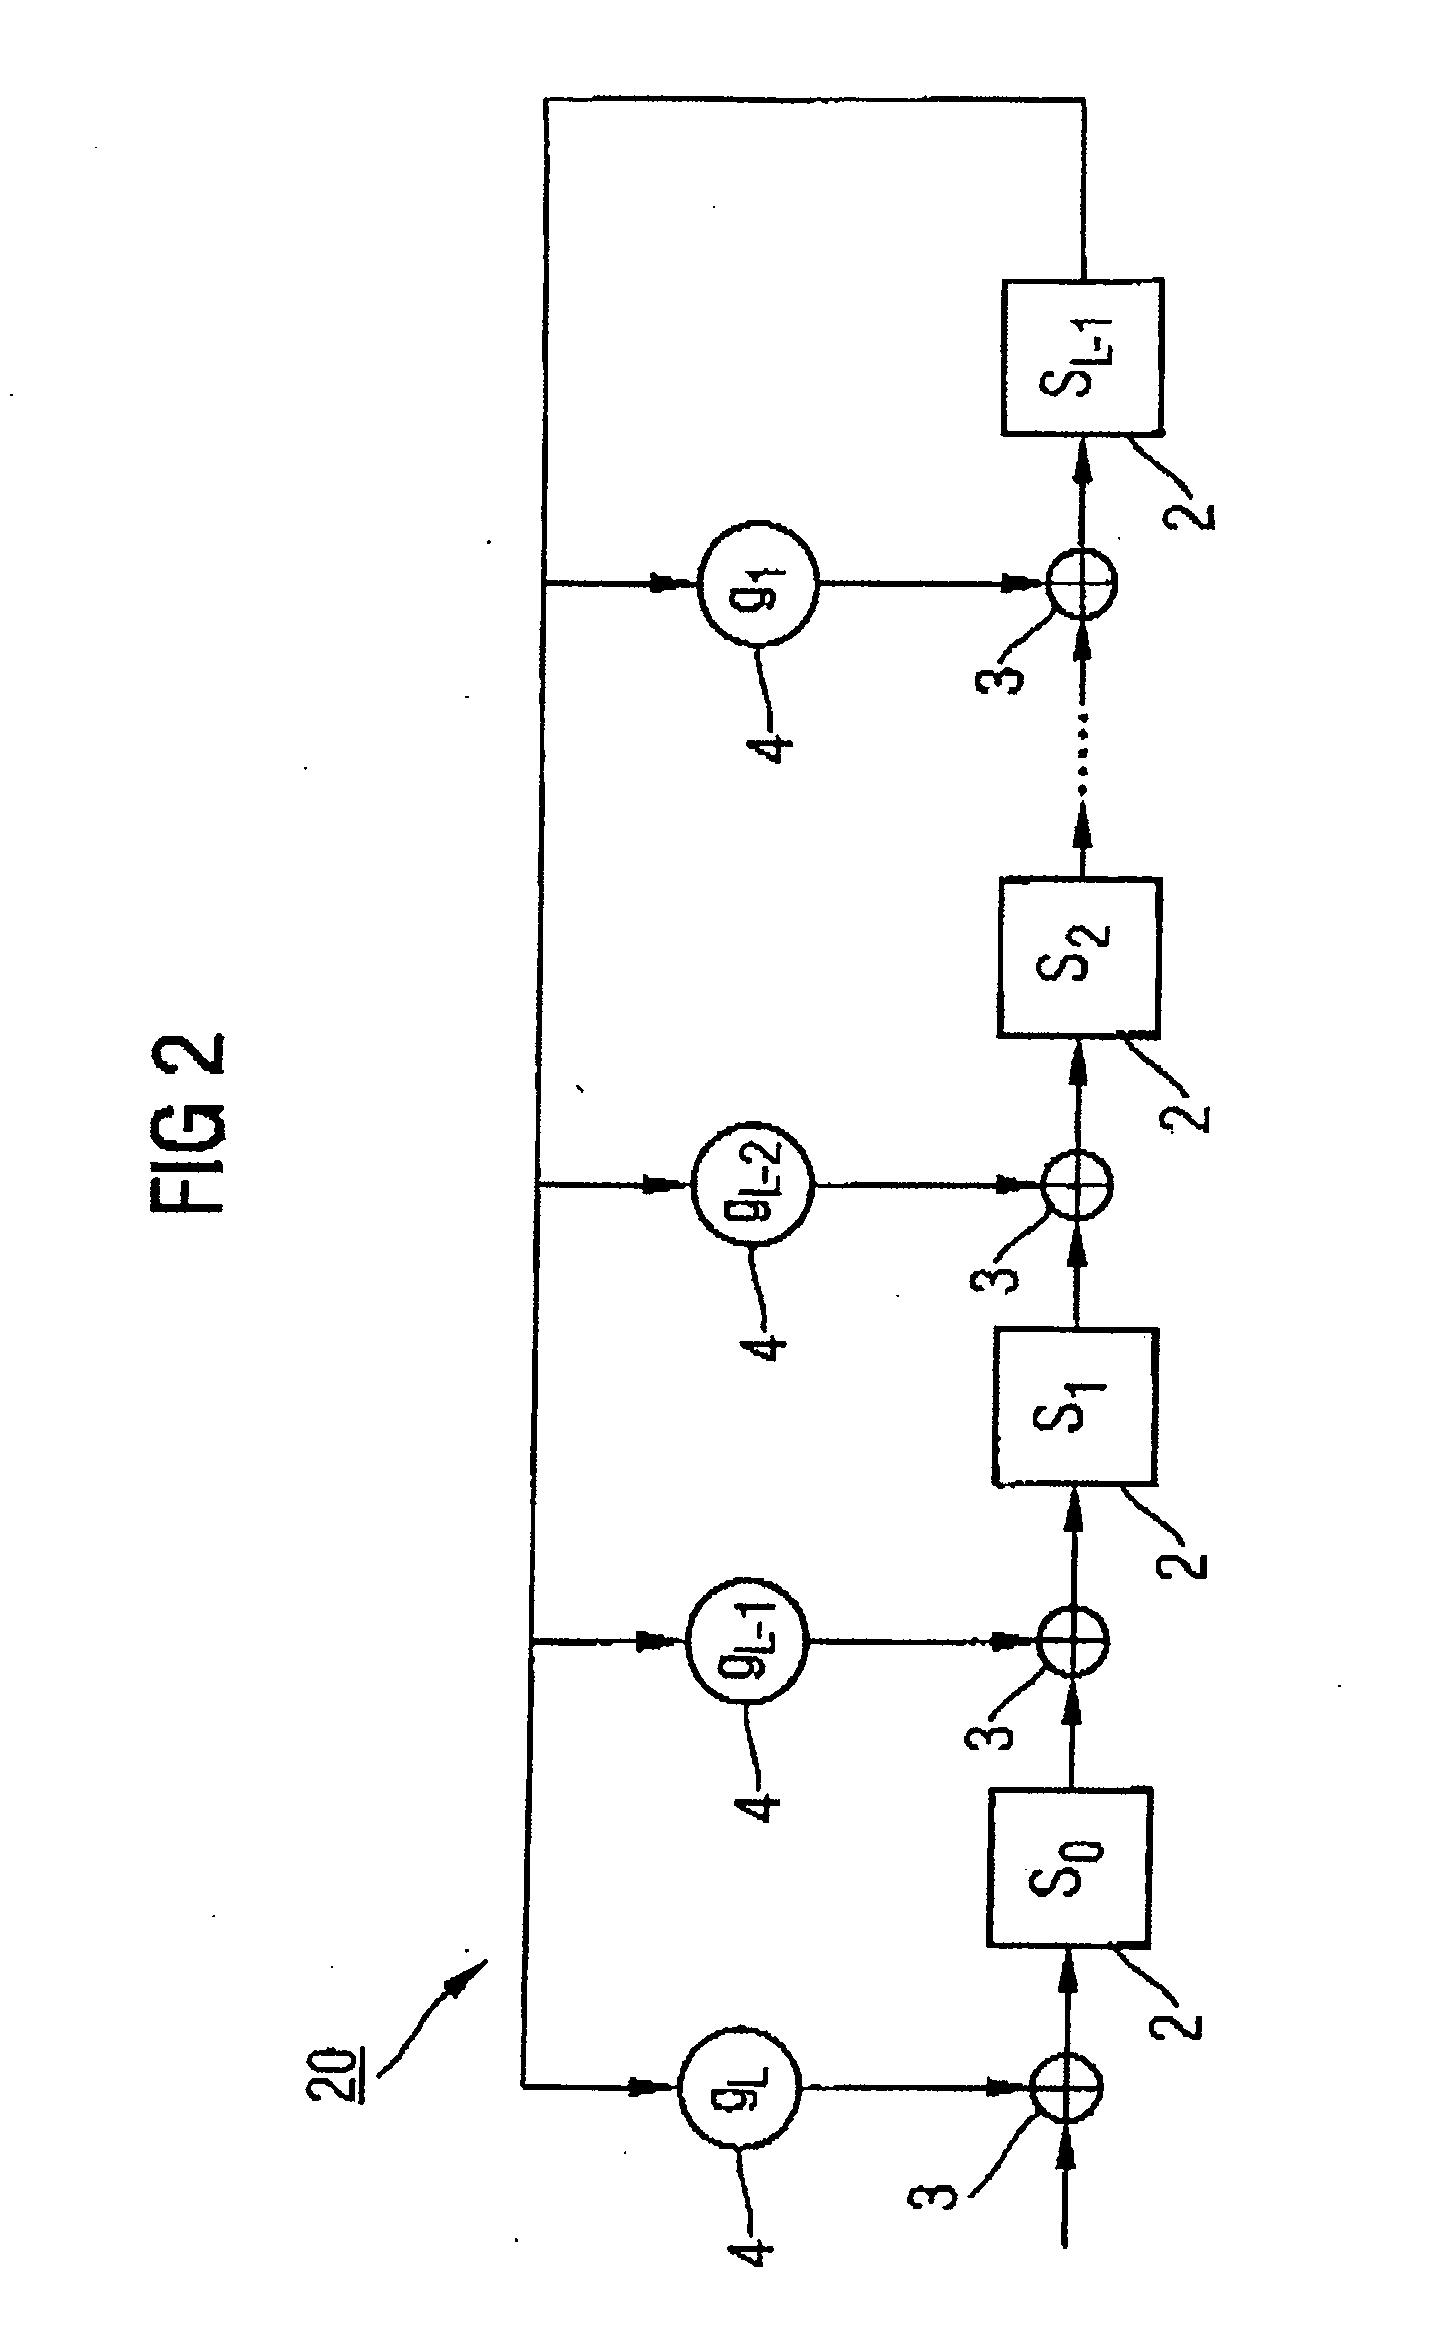 Parallel processing for decoding and cyclic redundancy checking for the reception of mobile radio signals